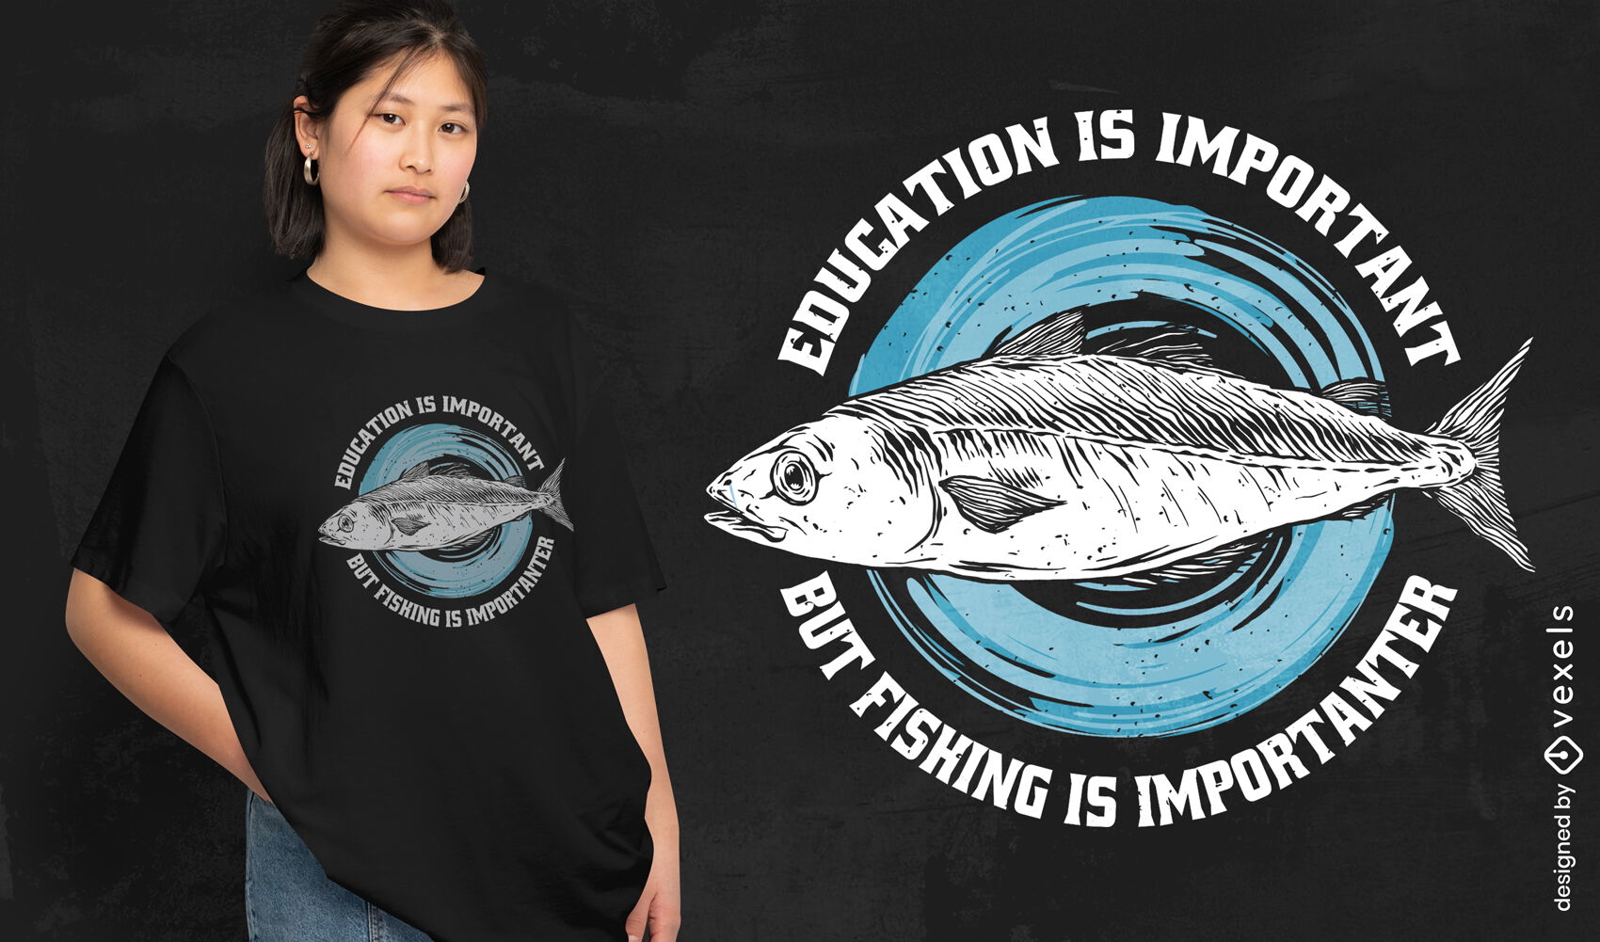 https://images.vexels.com/media/users/3/321477/raw/7ad371f62c7713eb810f32a7f6ae934e-funny-education-fishing-quote-t-shirt-design.jpg